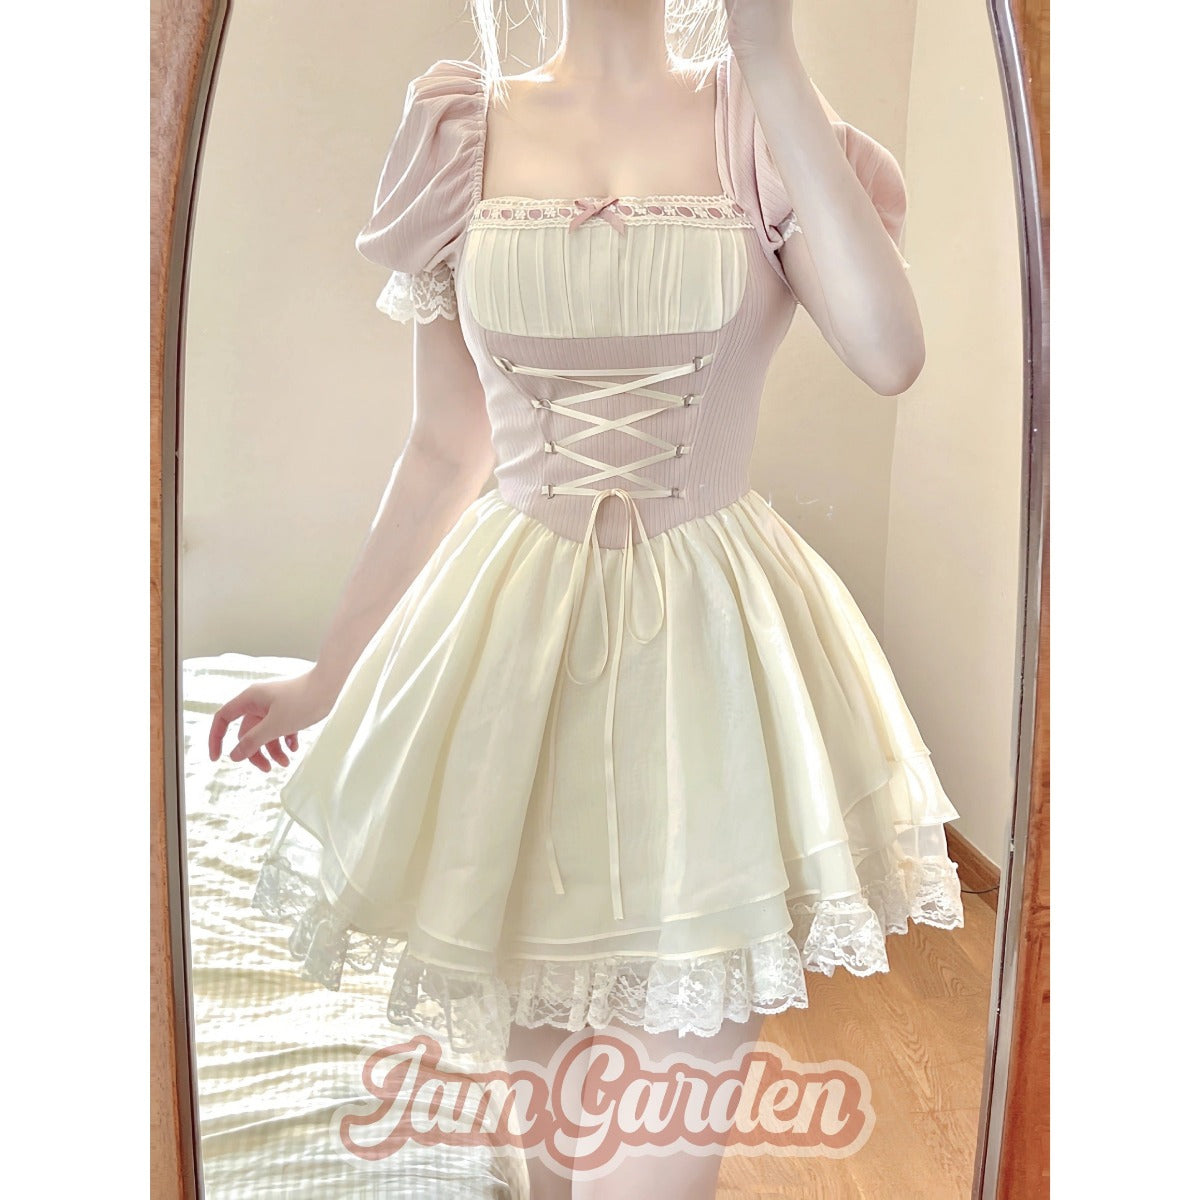 New Sweet Knitted Stitching Strappy Princess Dress - Jam Garden